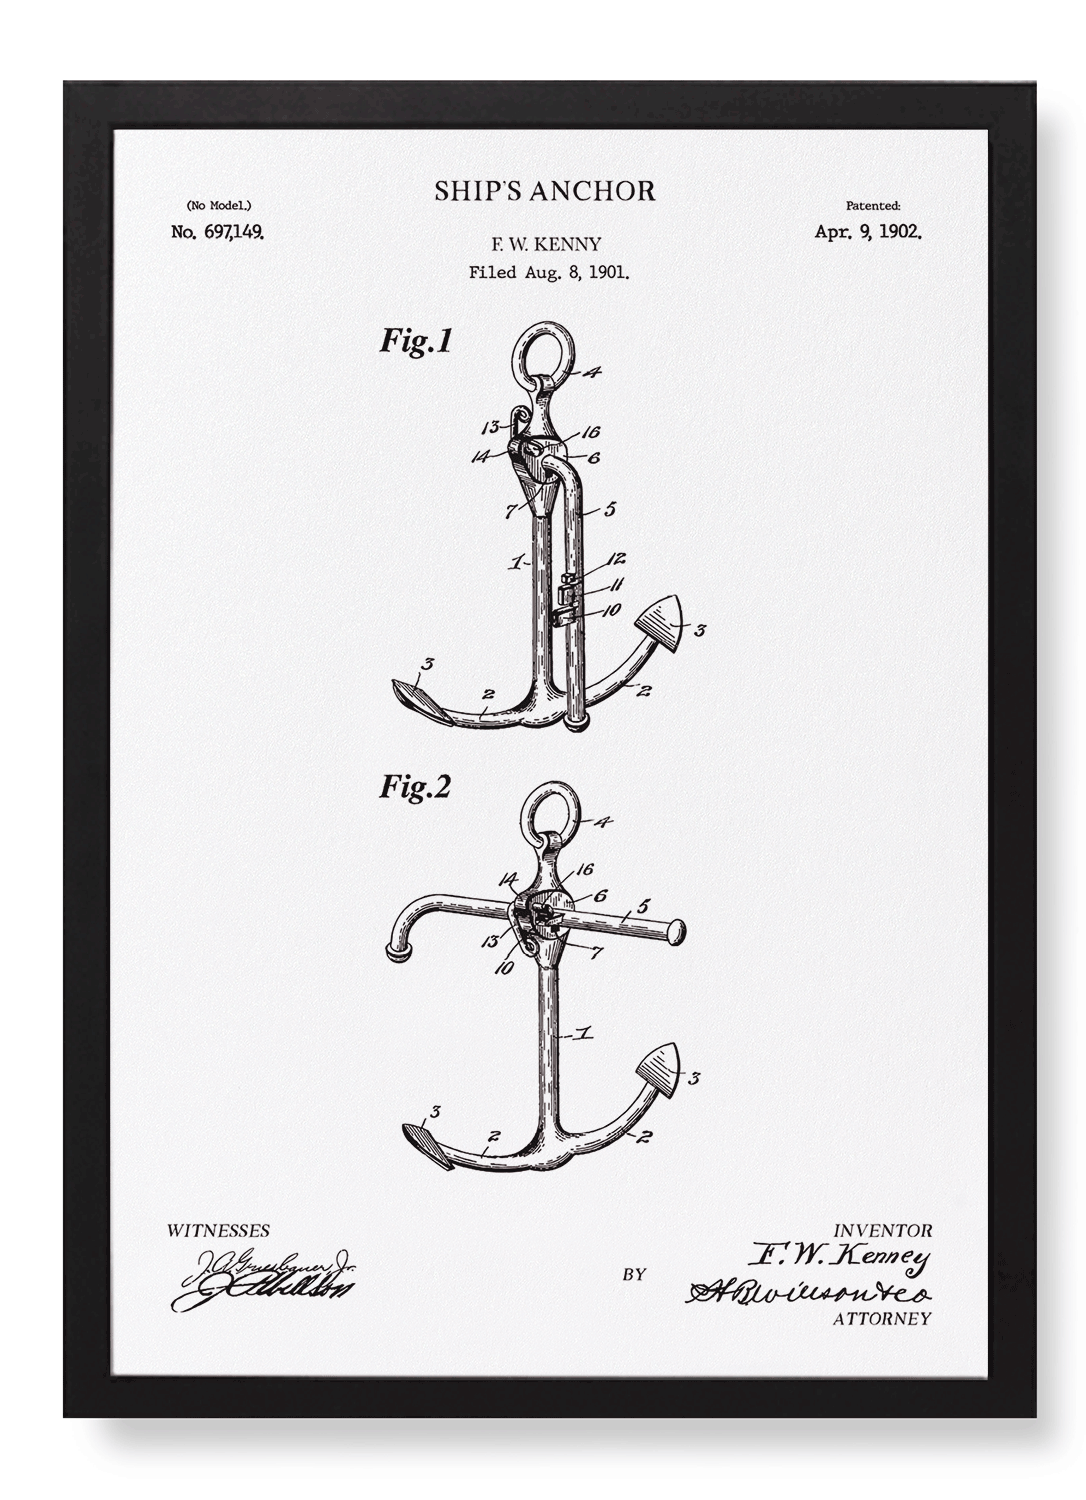 PATENT OF SHIP'S ANCHOR (1902)